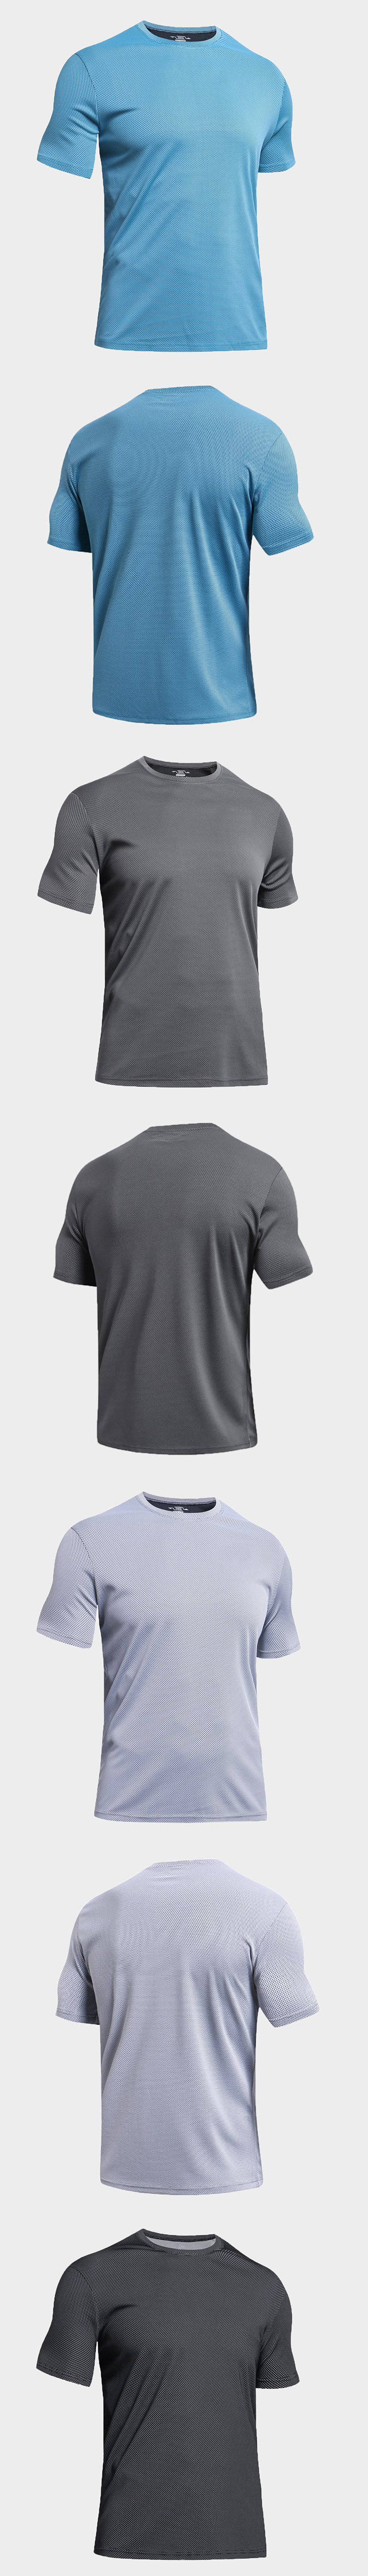 SHENGSHINIAO-Men-Sports-Fitness-Soft-Breathable-Quick-drying-Sweat-Absorbing-Clothing-T-shirts-1330824